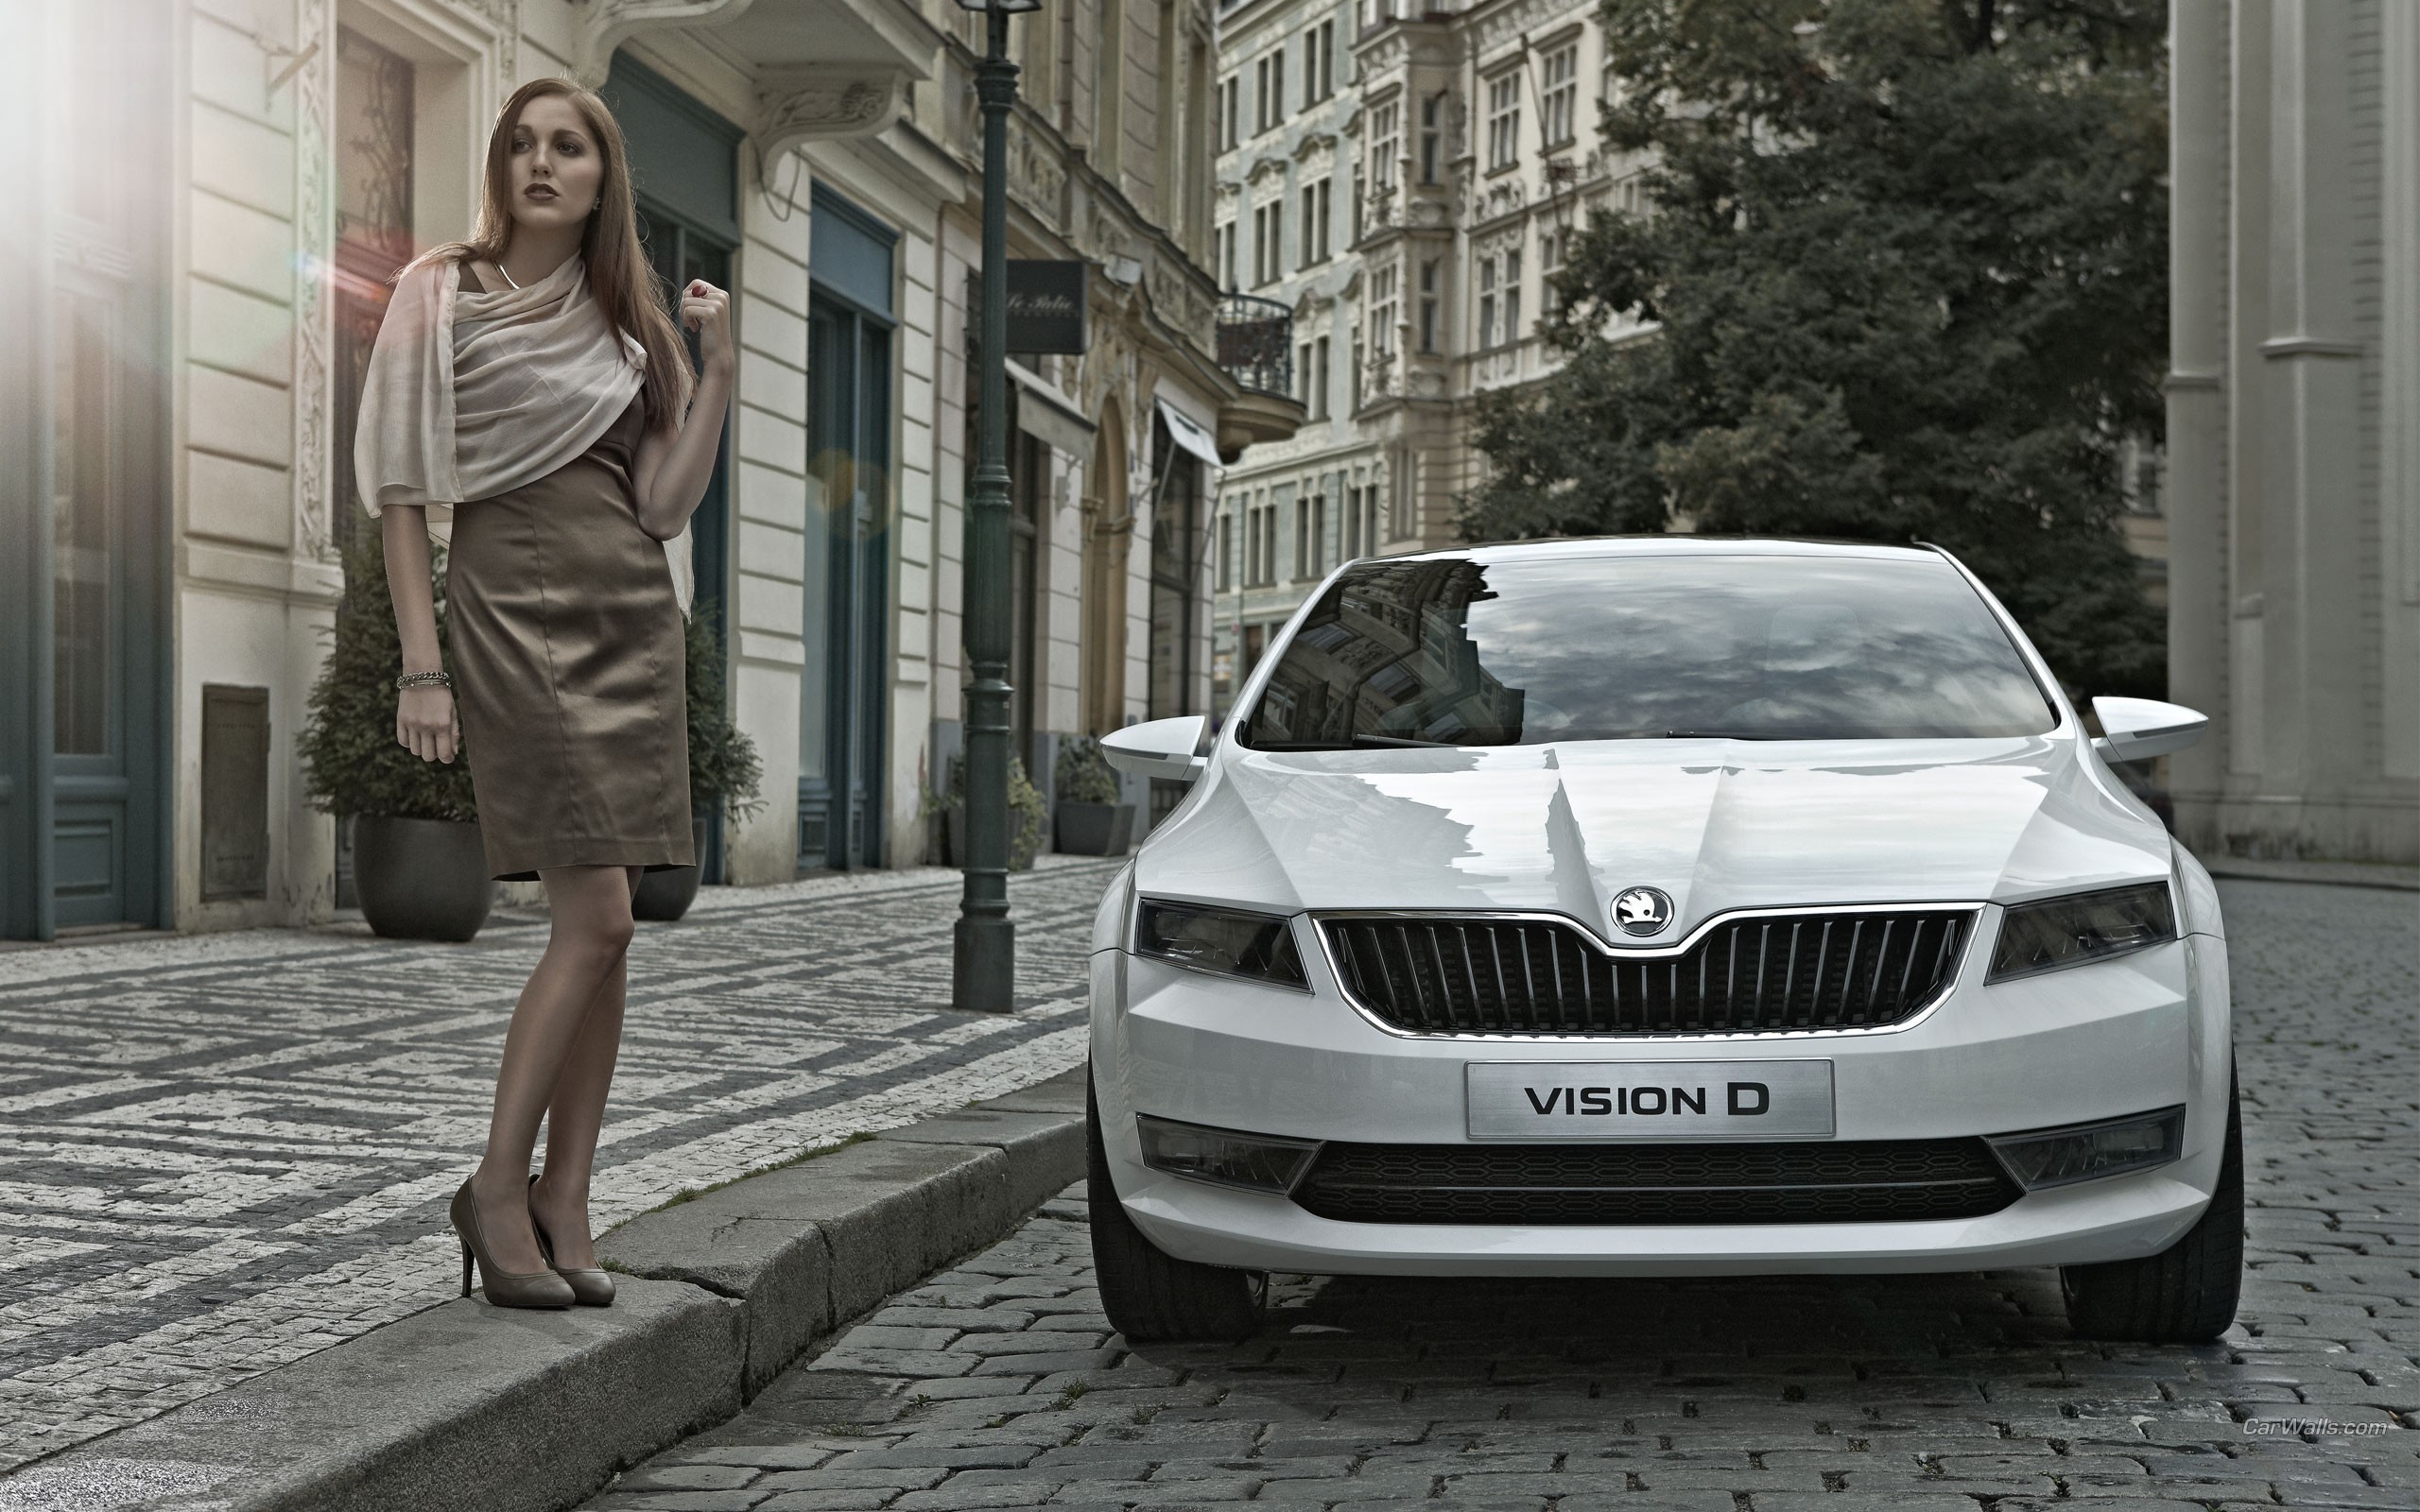 2560x1600 ... Next: Skoda Vision D Concept. Category: World wallpapers